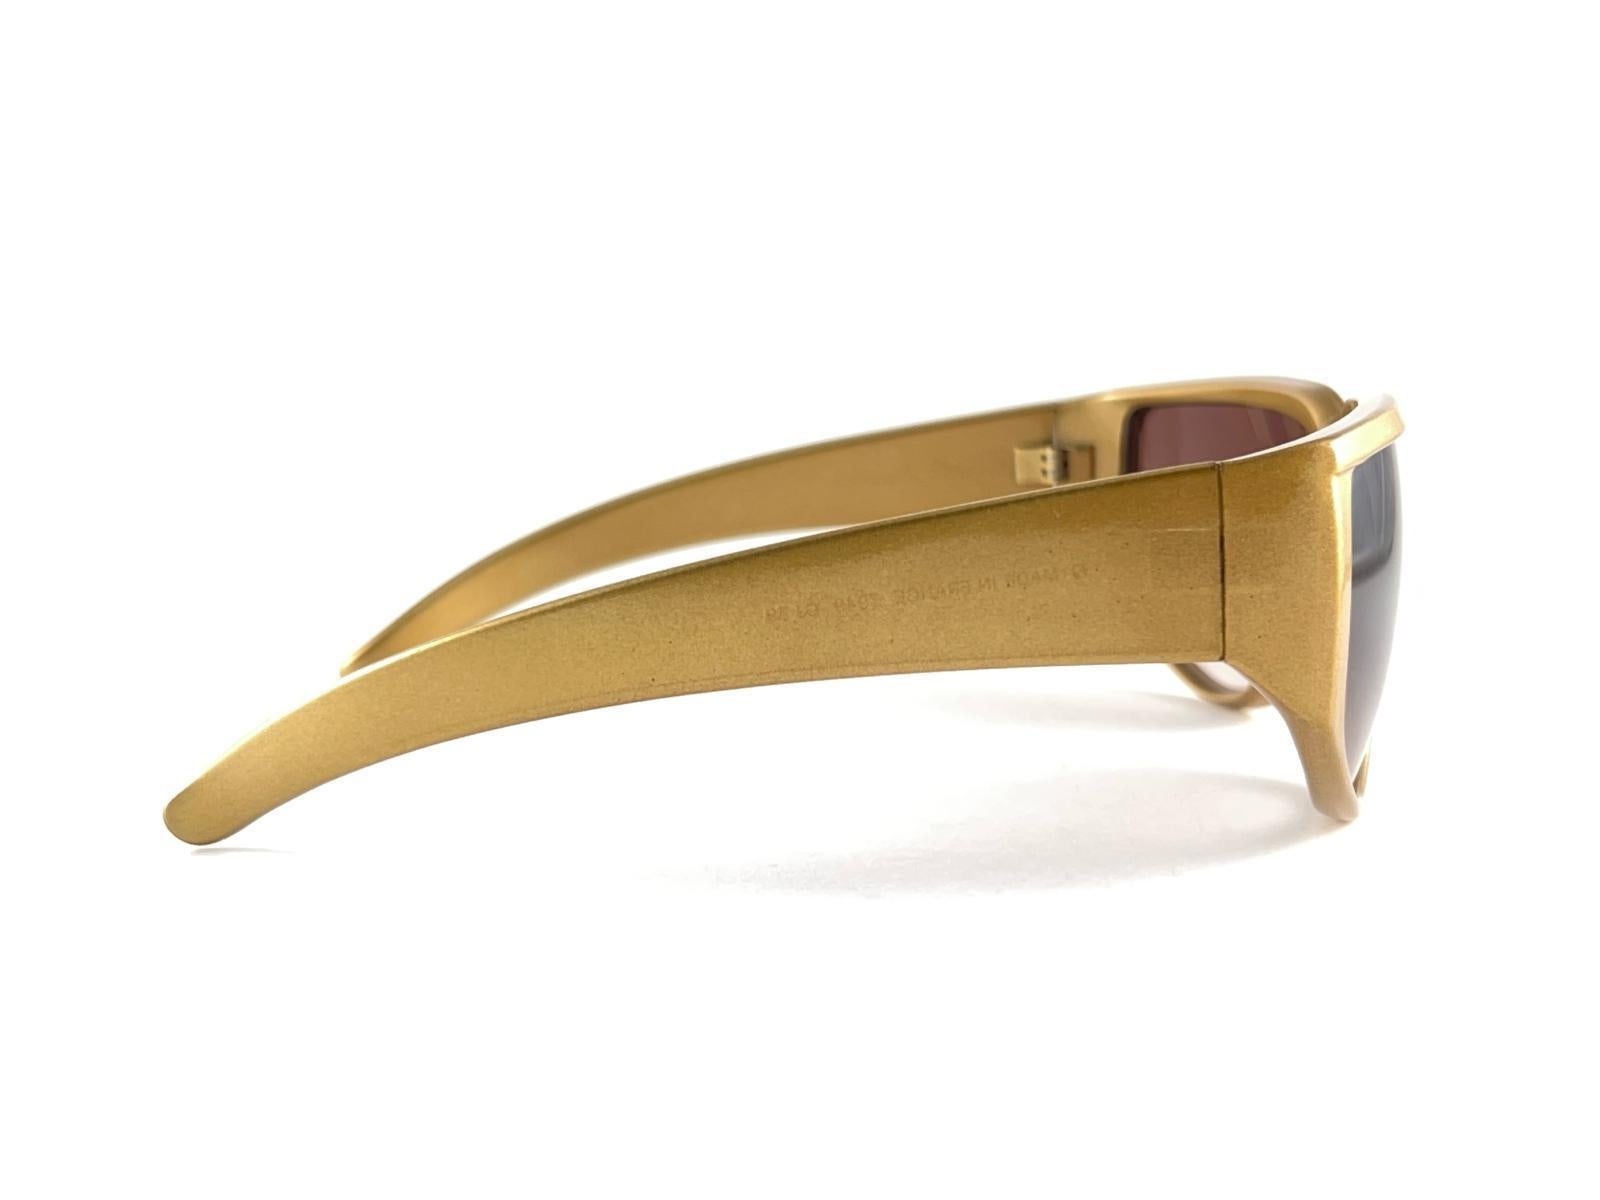 New Vintage Charles Jourdan Paris Gold Frame Gradient Lenses 1970's Sunglasses In Excellent Condition For Sale In Baleares, Baleares